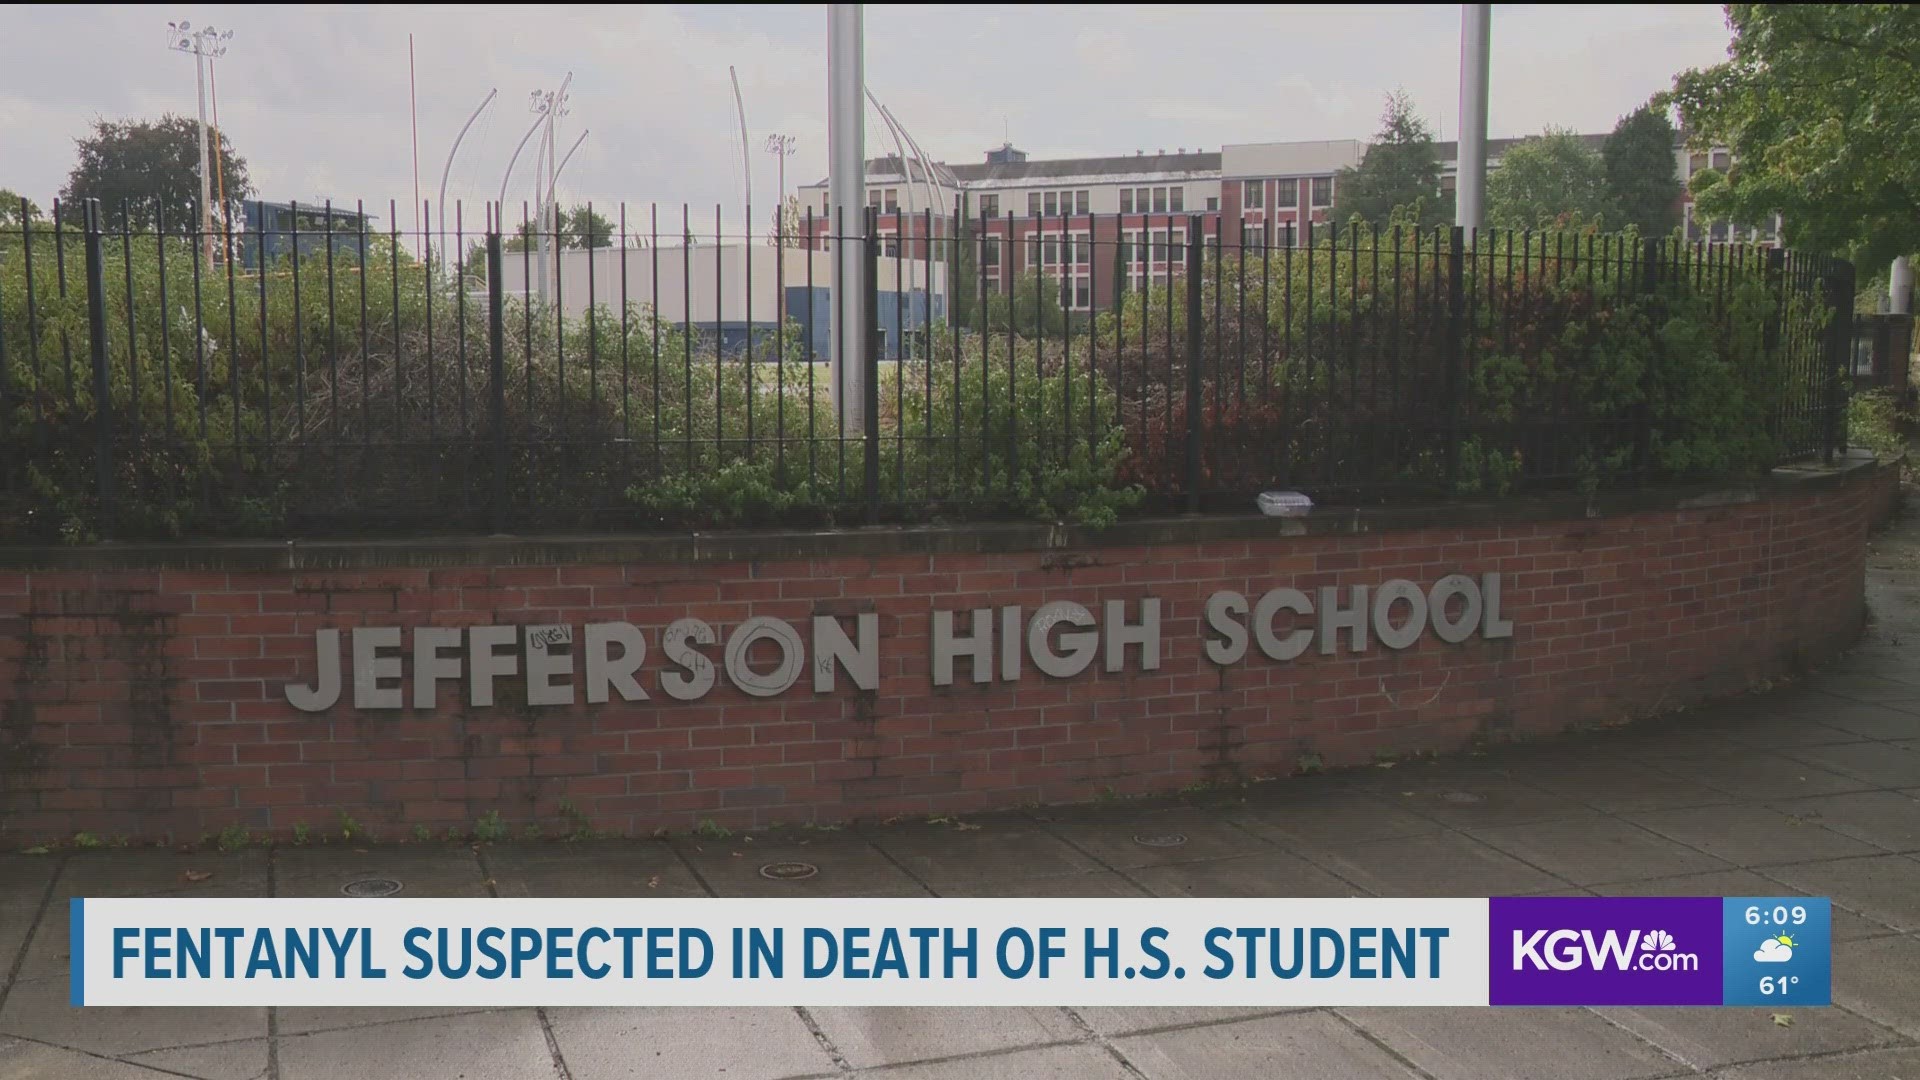 Portland Public Schools told families that a 15-year-old student died on Sunday. Police told KGW they are investigating her suspected fentanyl overdose.